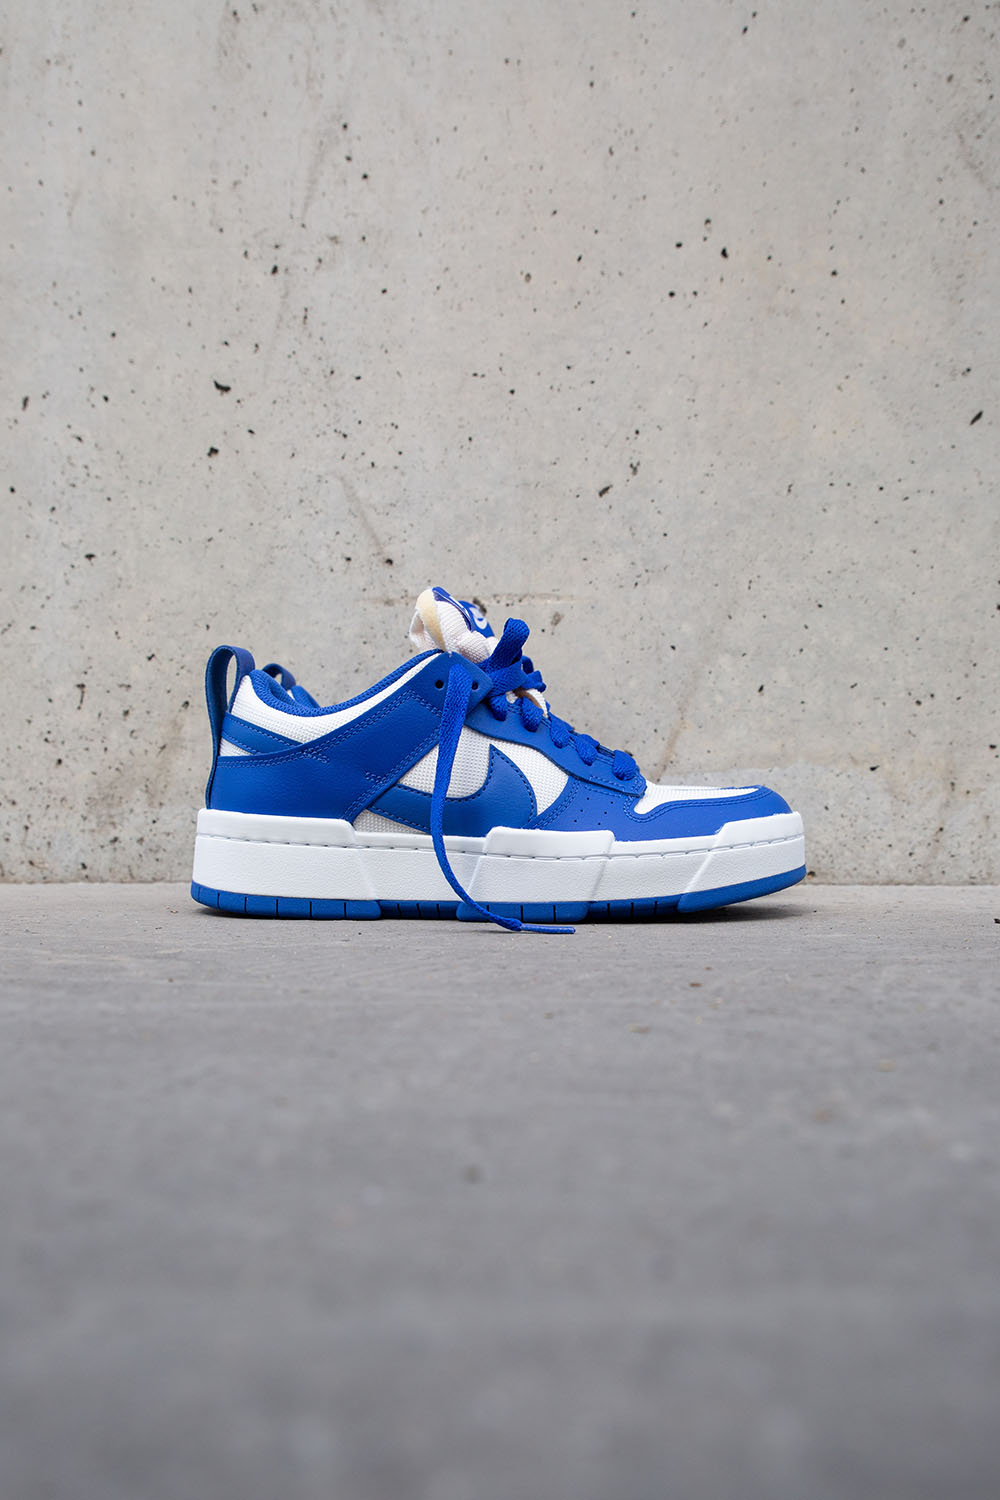 nike-dunk-low-disrupt-ck6654-100-release-20200904